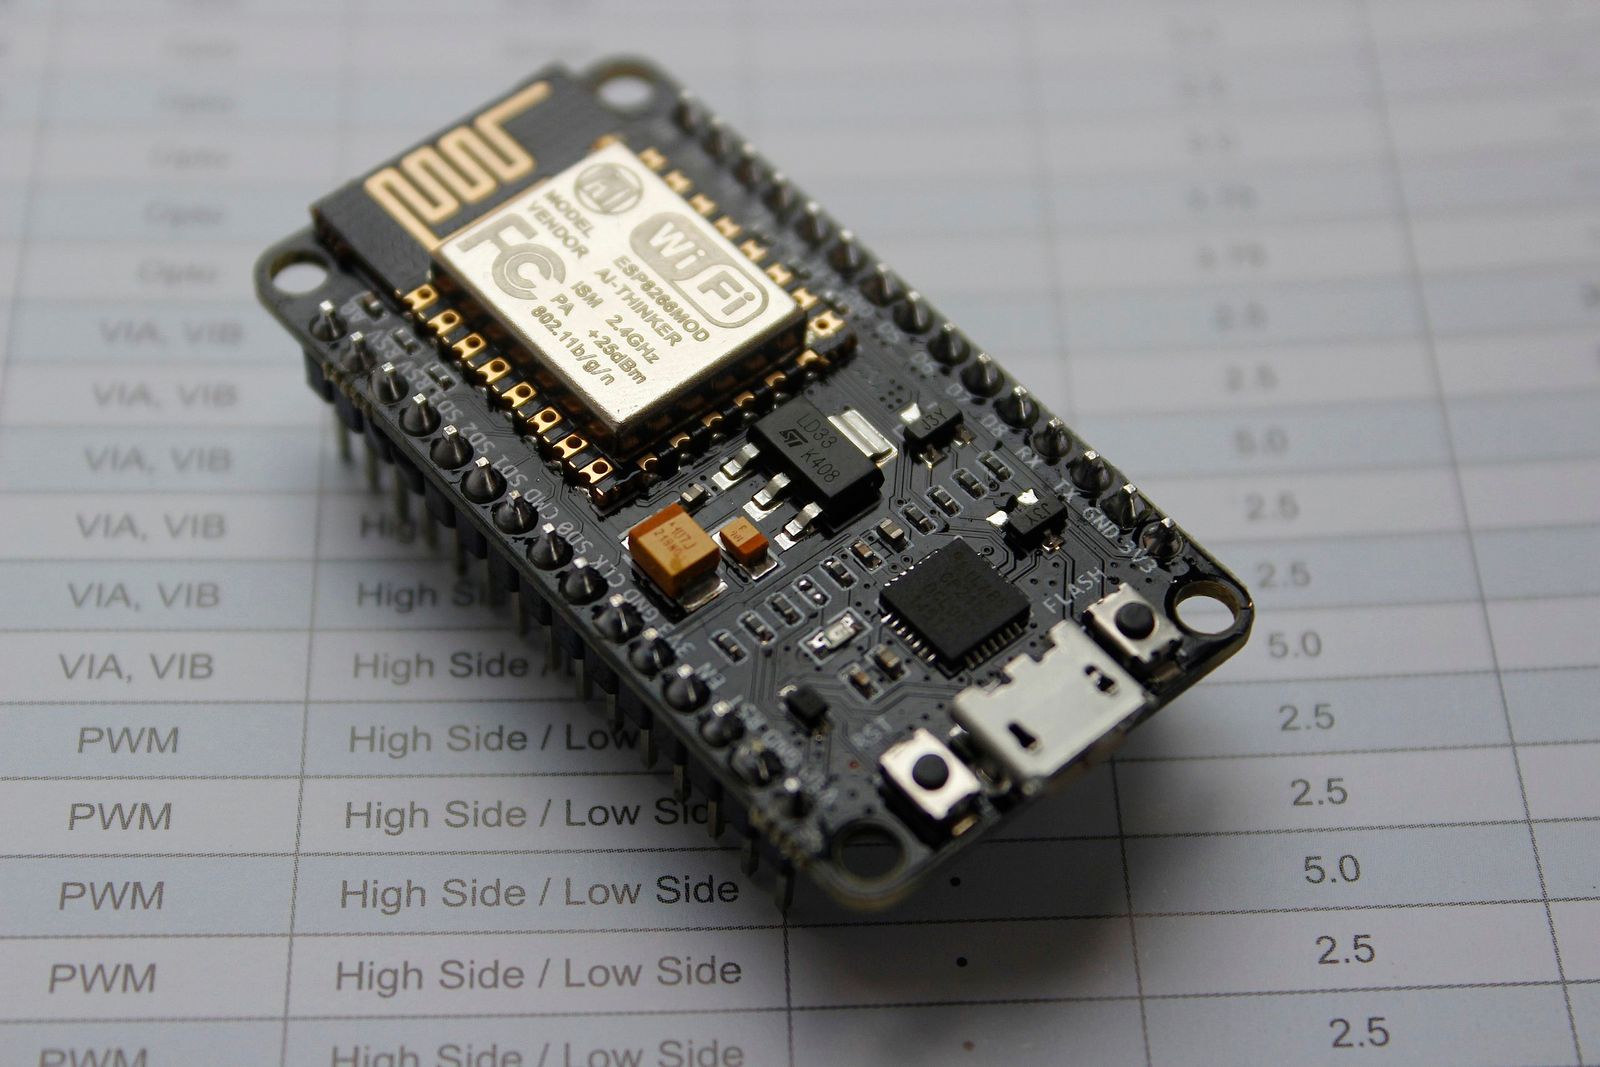 NodeMCU - By Vowstar - Own work, CC BY-SA 4.0, https://commons.wikimedia.org/w/index.php?curid=39477865